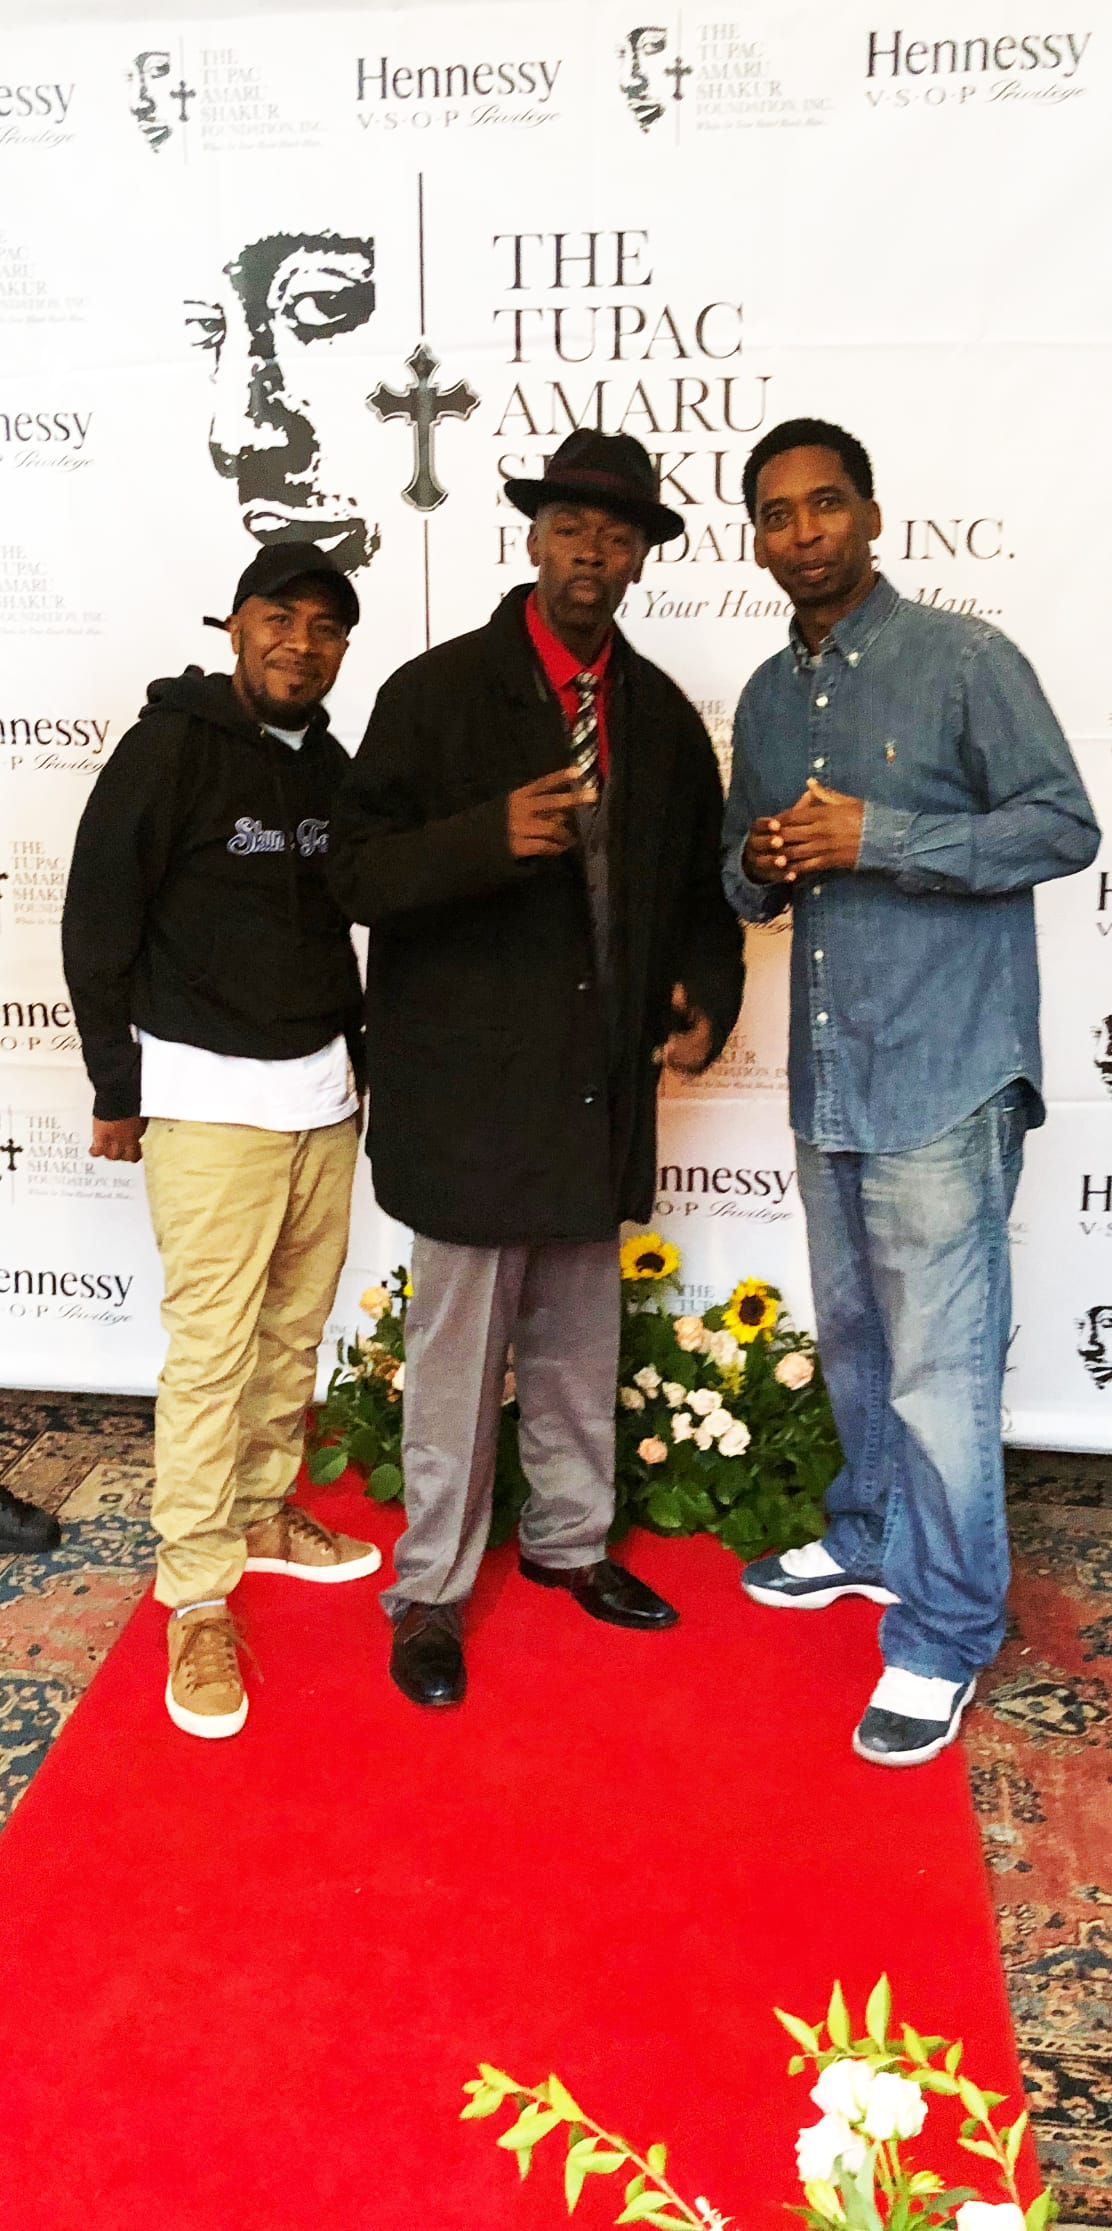 JR-Valrey-Rappin-4Tay-Kevin-Epps-at-Tupac-Shakur-Foundation-event-2019, Support cultural icon Kevin Epps in court Tuesday, Dec. 17, Featured Local News & Views 